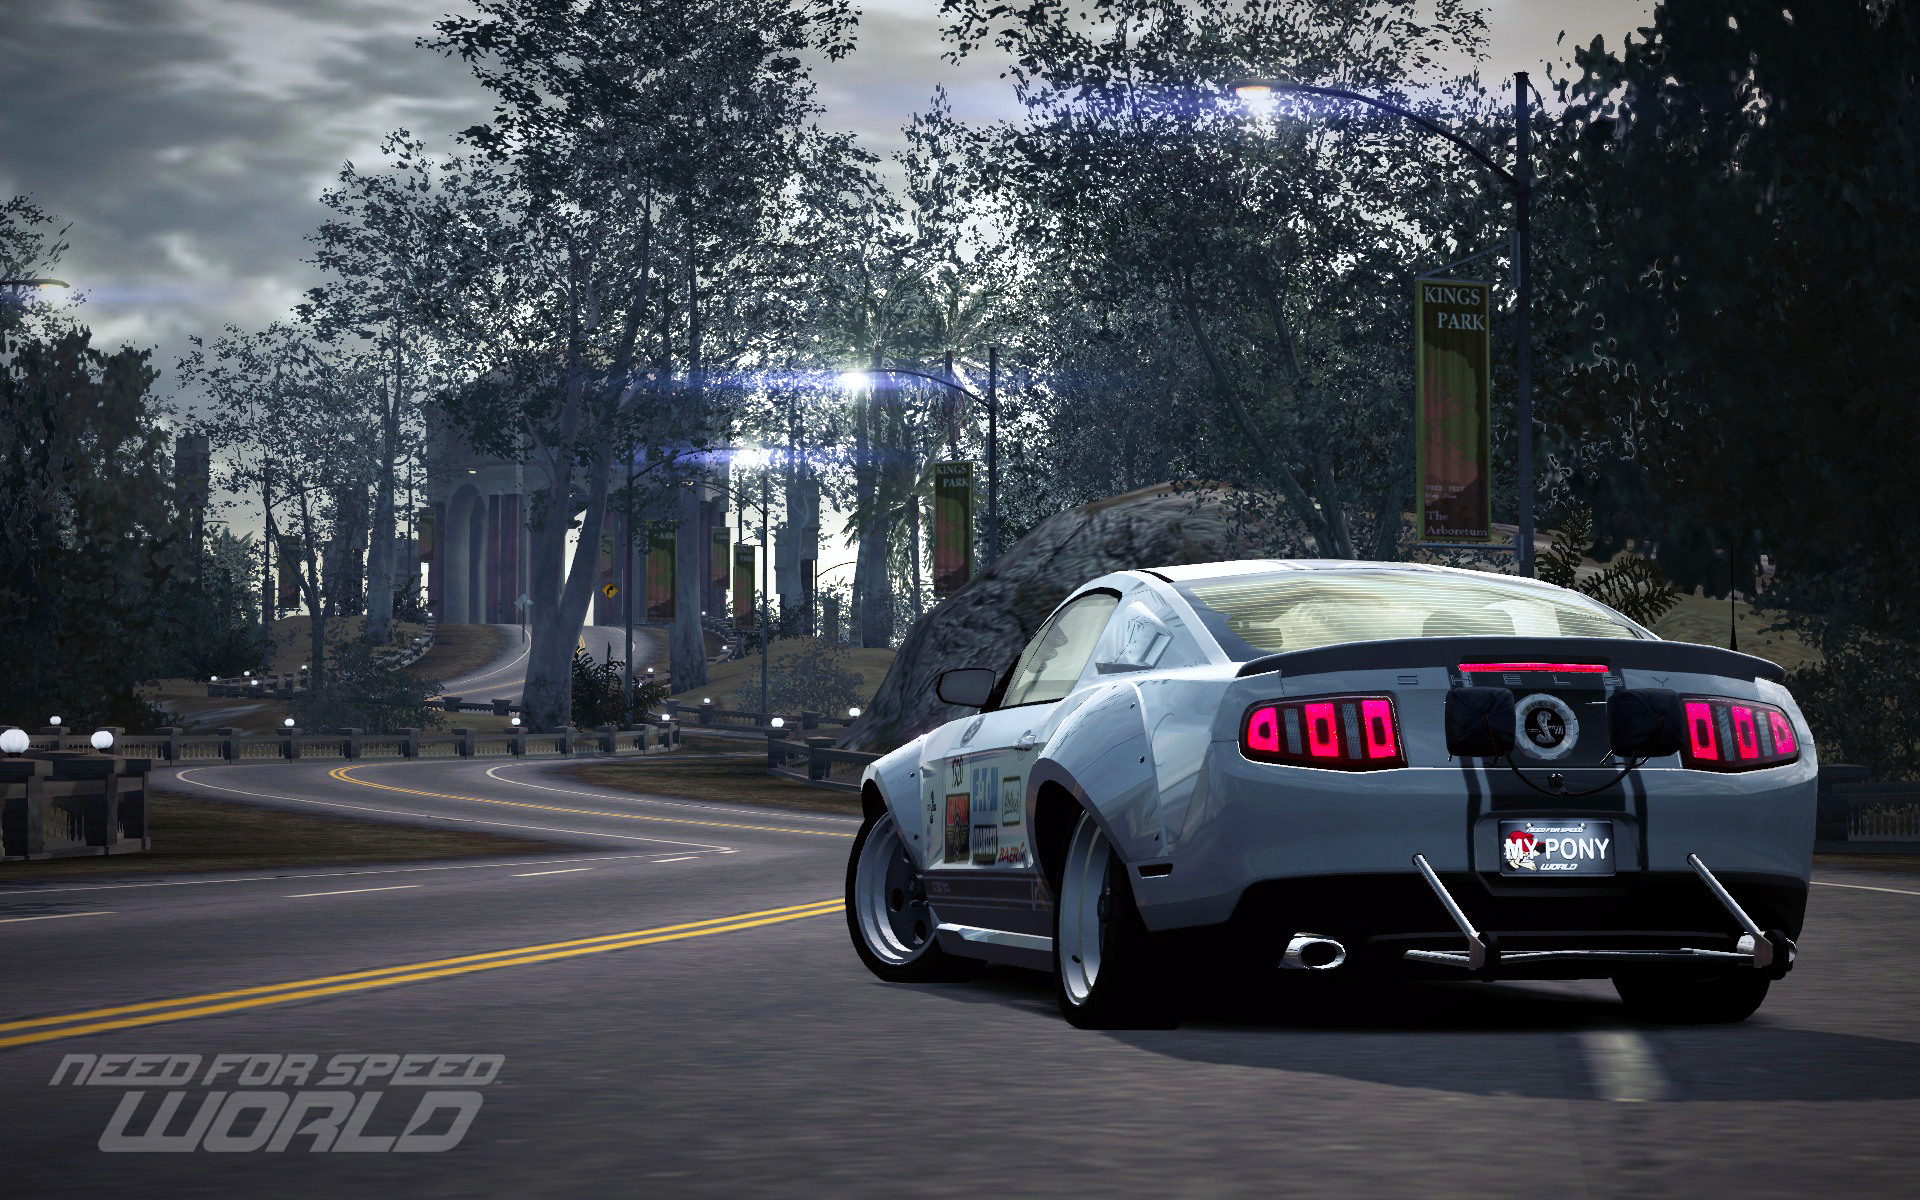 Need for Speed World Images - GameSpot